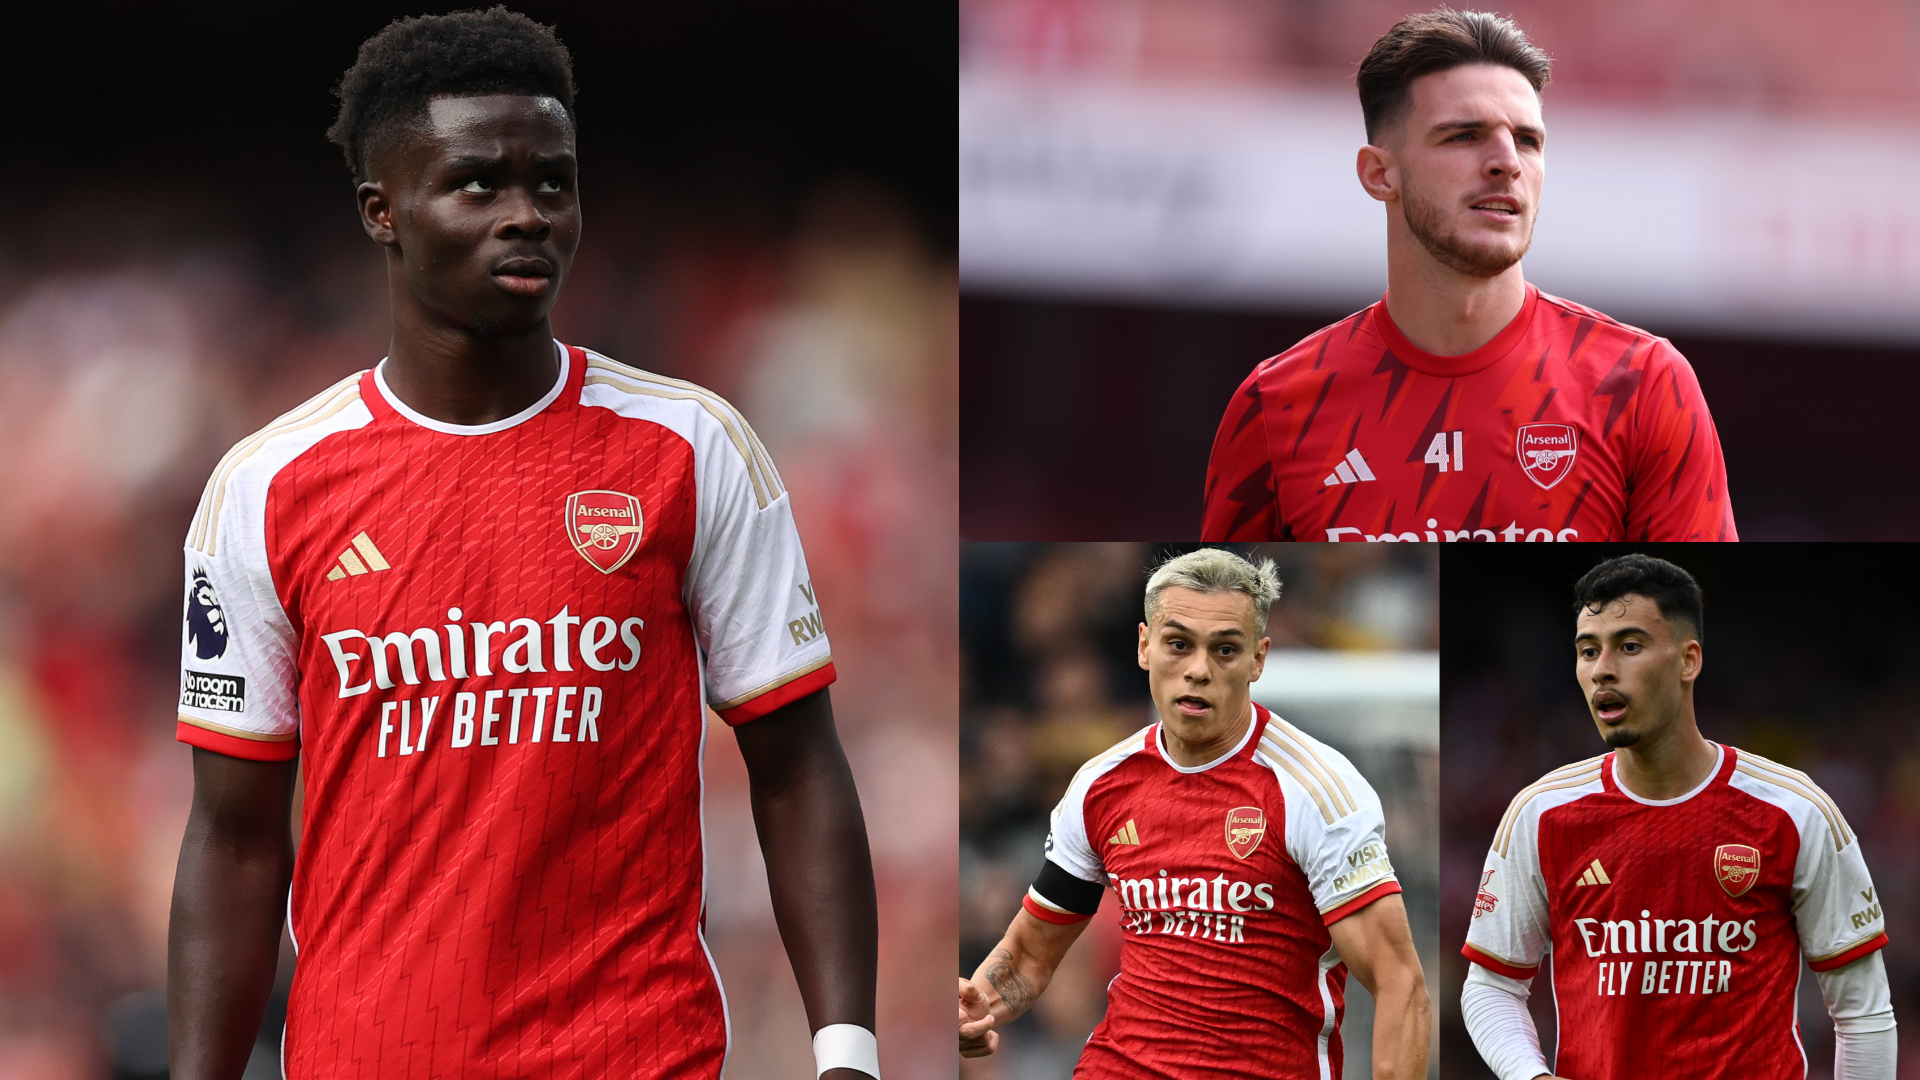 Arsenal injury latest: The full list of players missing and how